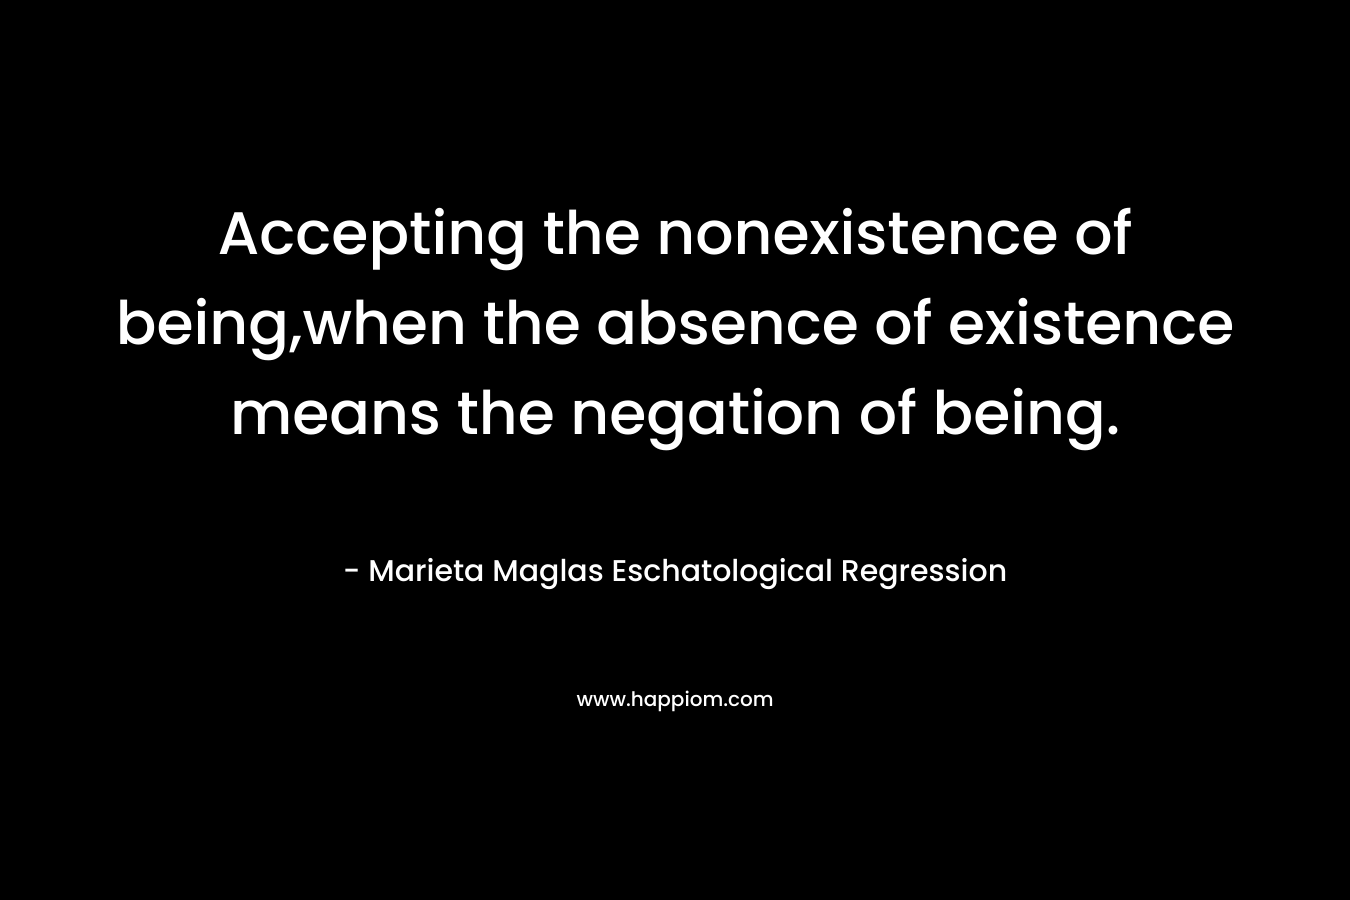 Accepting the nonexistence of being,when the absence of existence means the negation of being. – Marieta Maglas Eschatological Regression